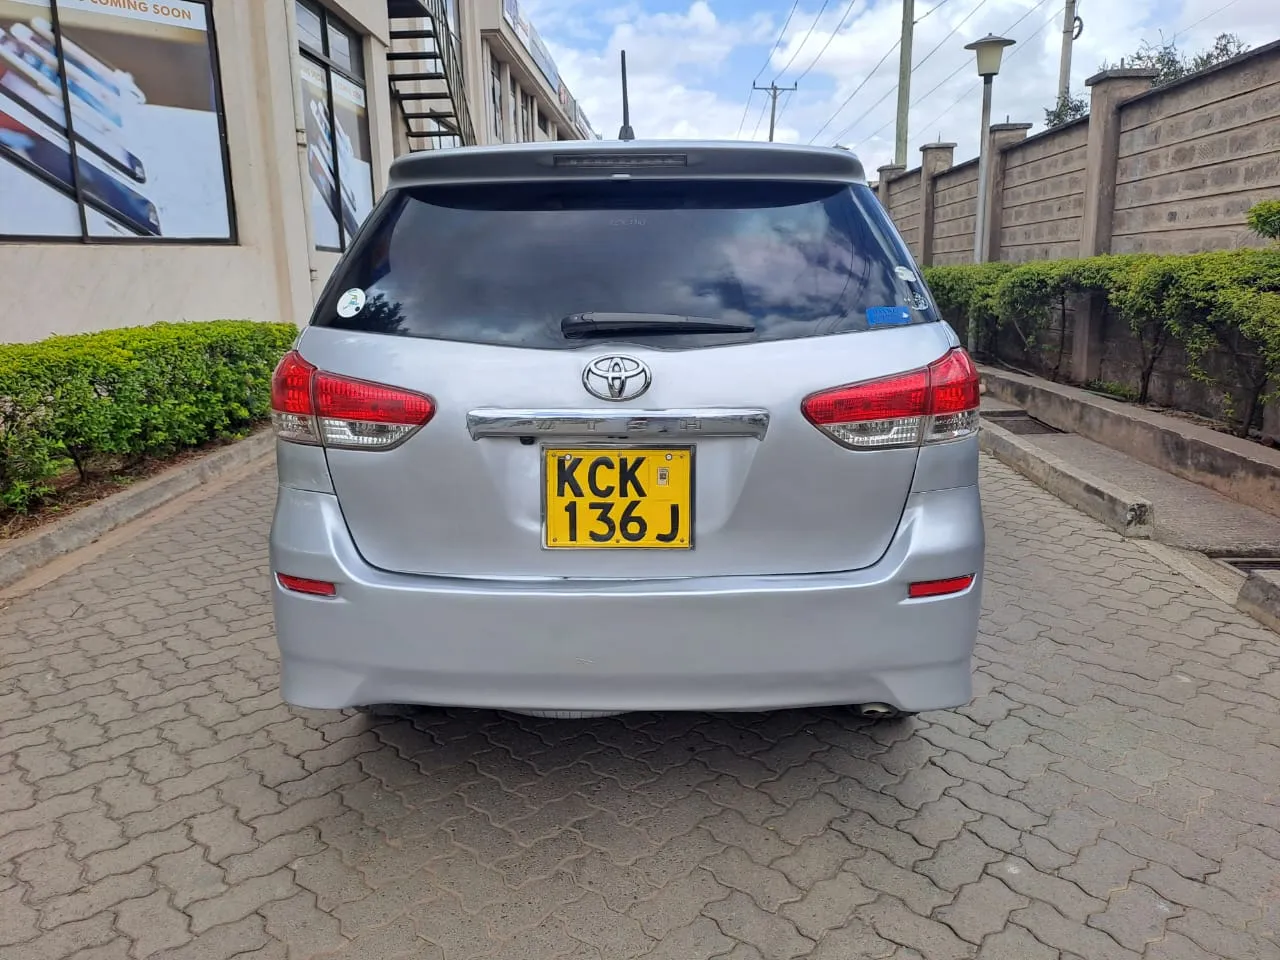 Toyota WISH for sale in Kenya QUICKEST SALE You Pay 30% Deposit Trade in OK EXCLUSIVE Hire Purchase Installments bank finance 🔥🔥